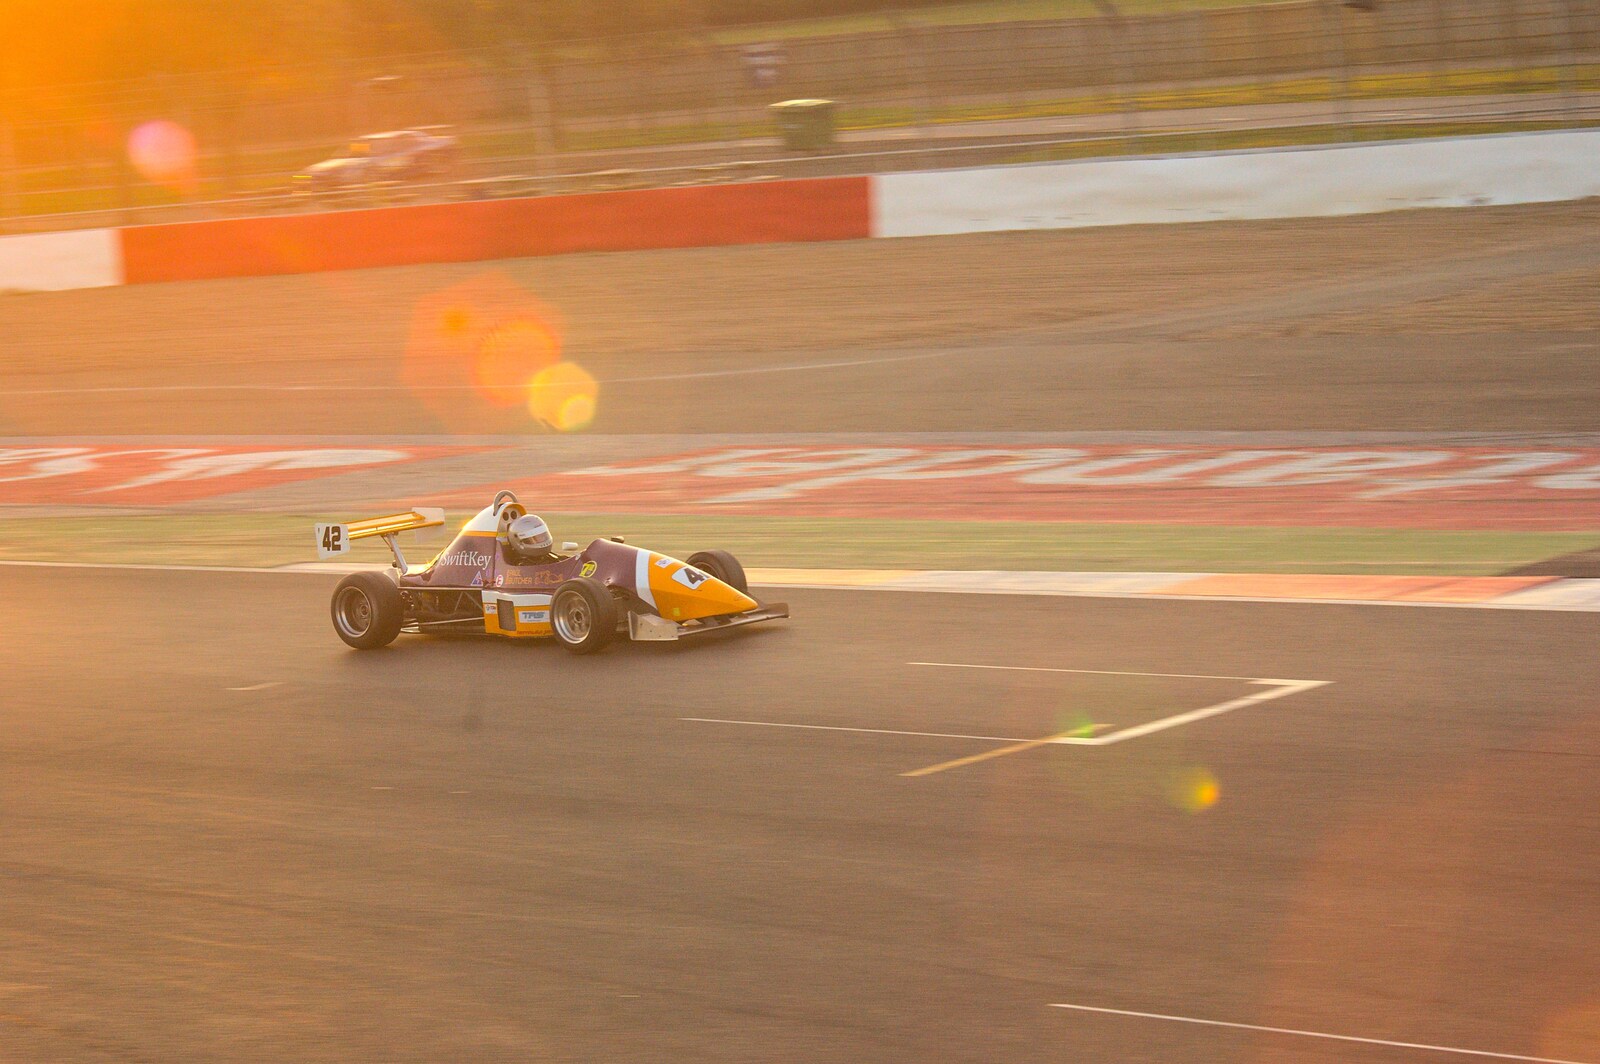 Paul's car - number 42 - races around from TouchType at Silverstone, Northamptonshire - 22nd October 2011